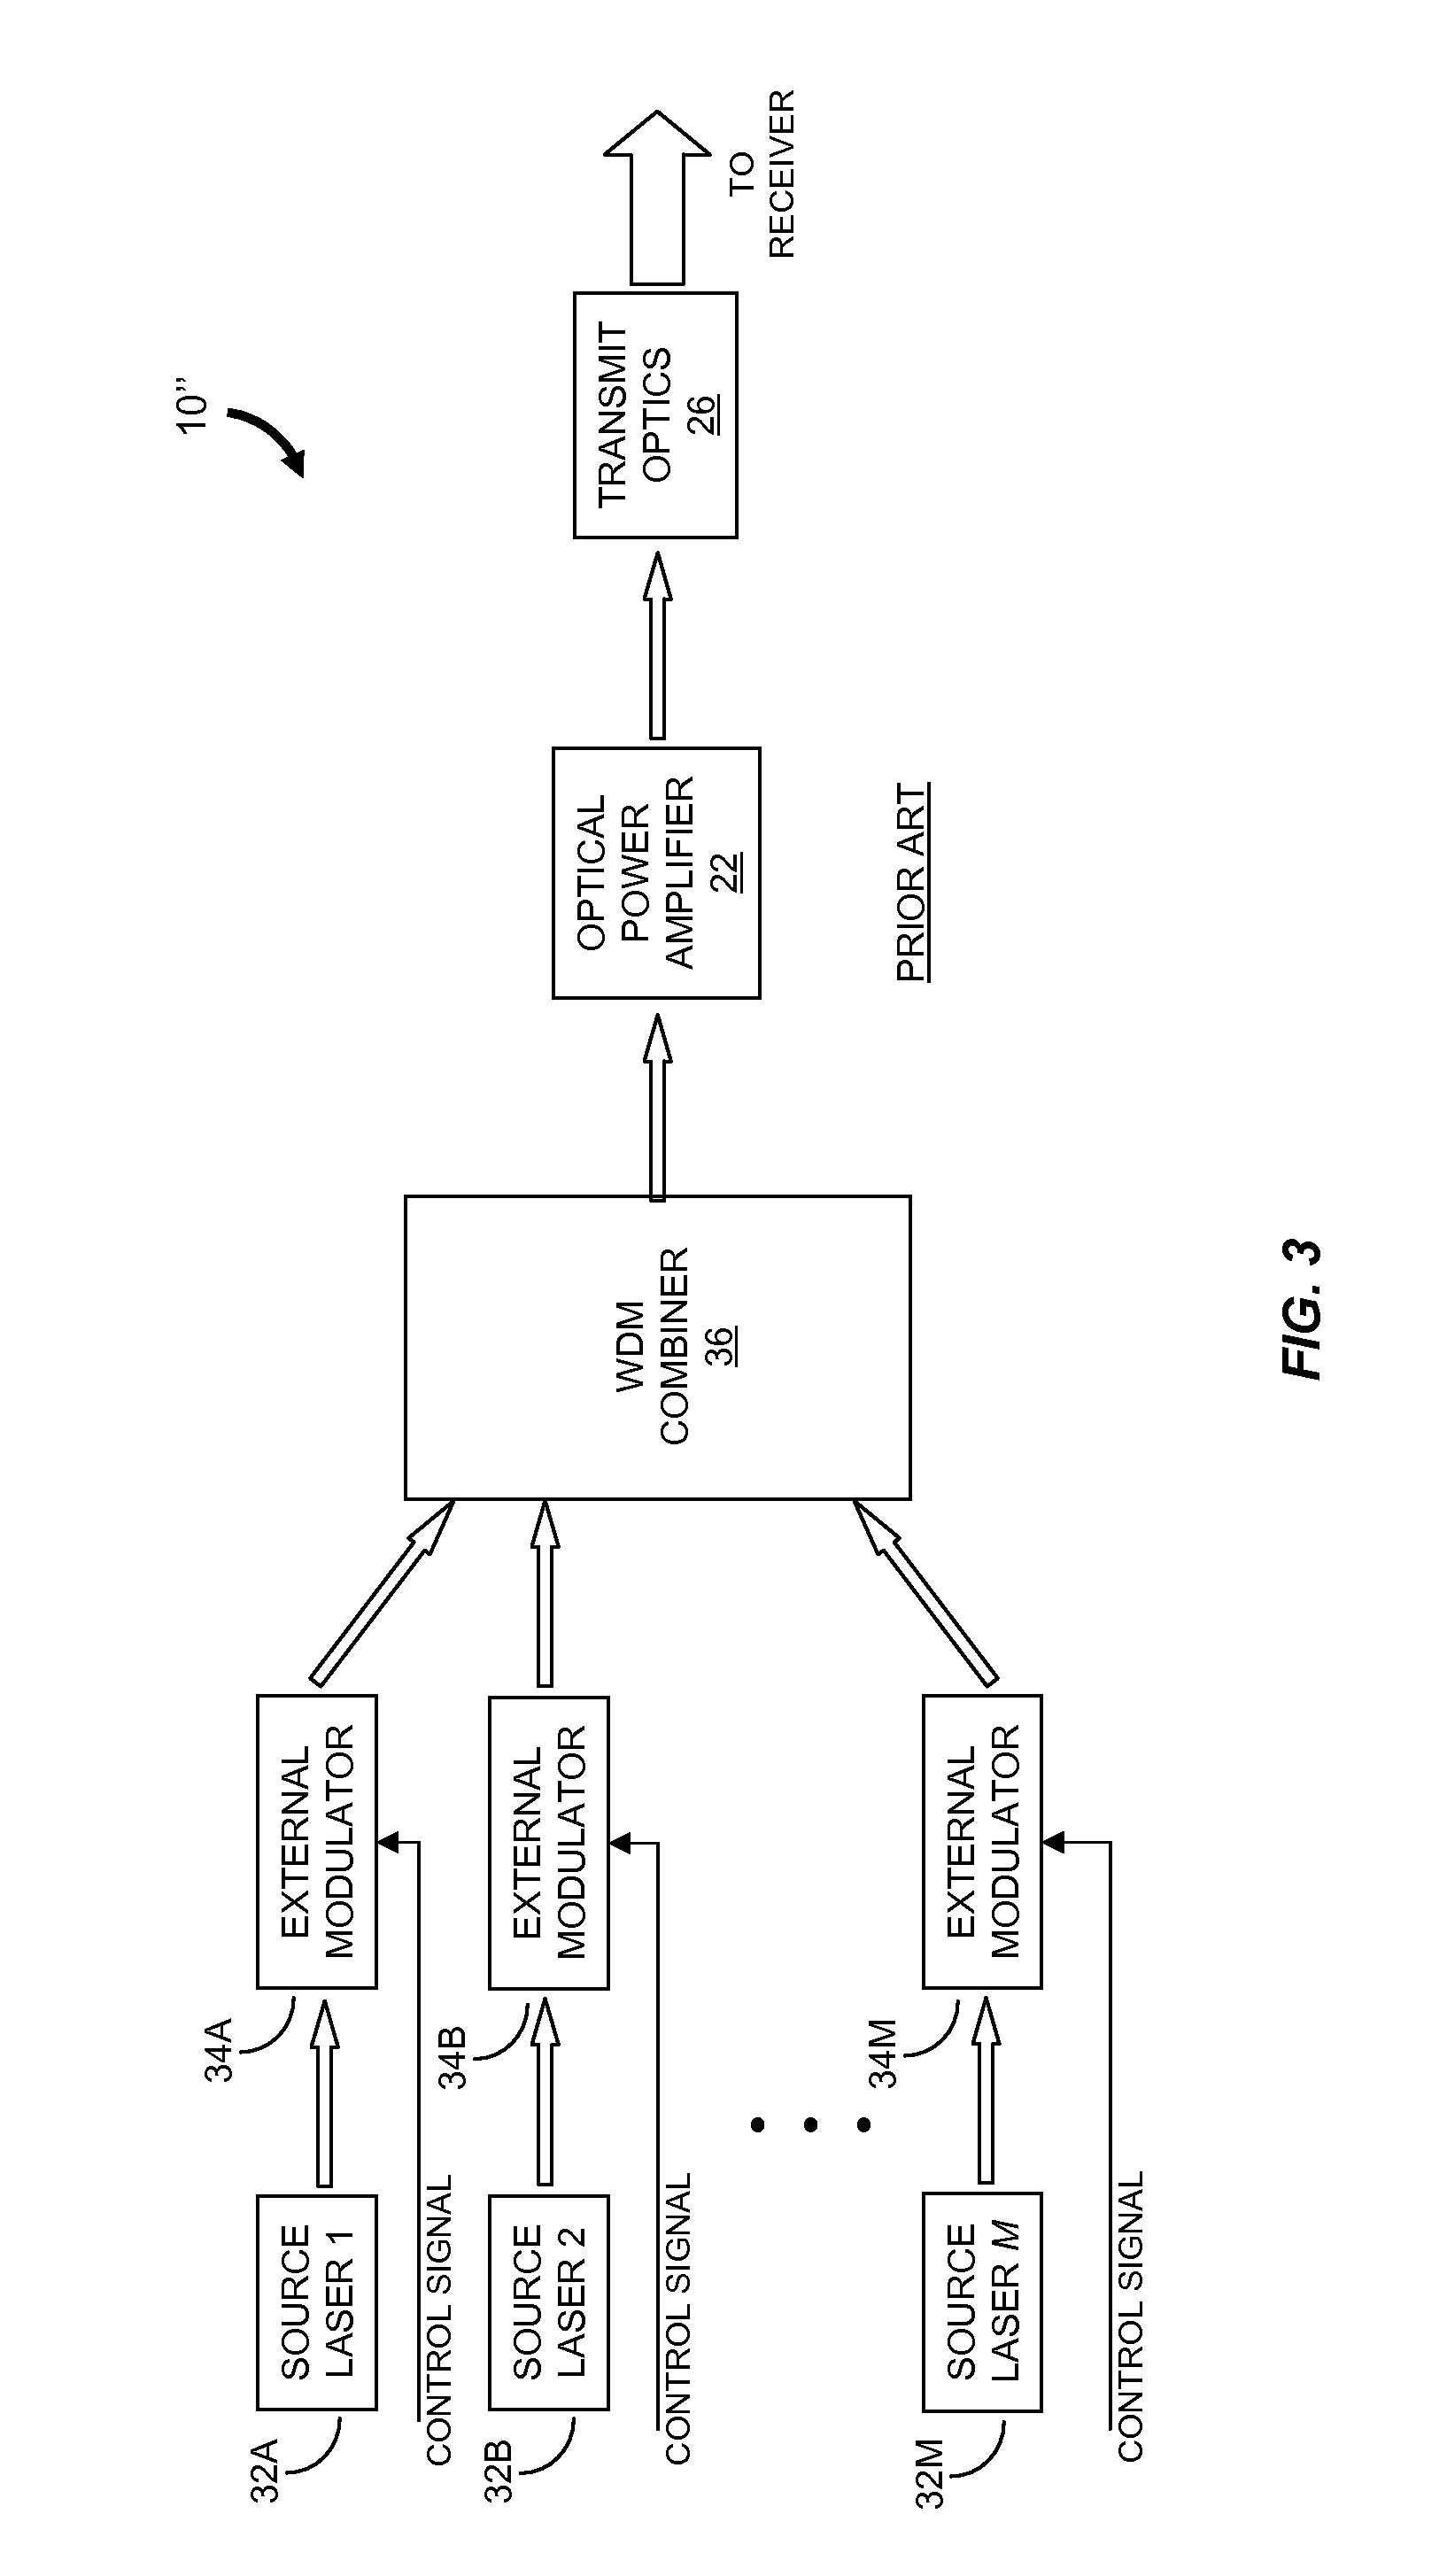 Modulator for frequency-shift keying of optical signals